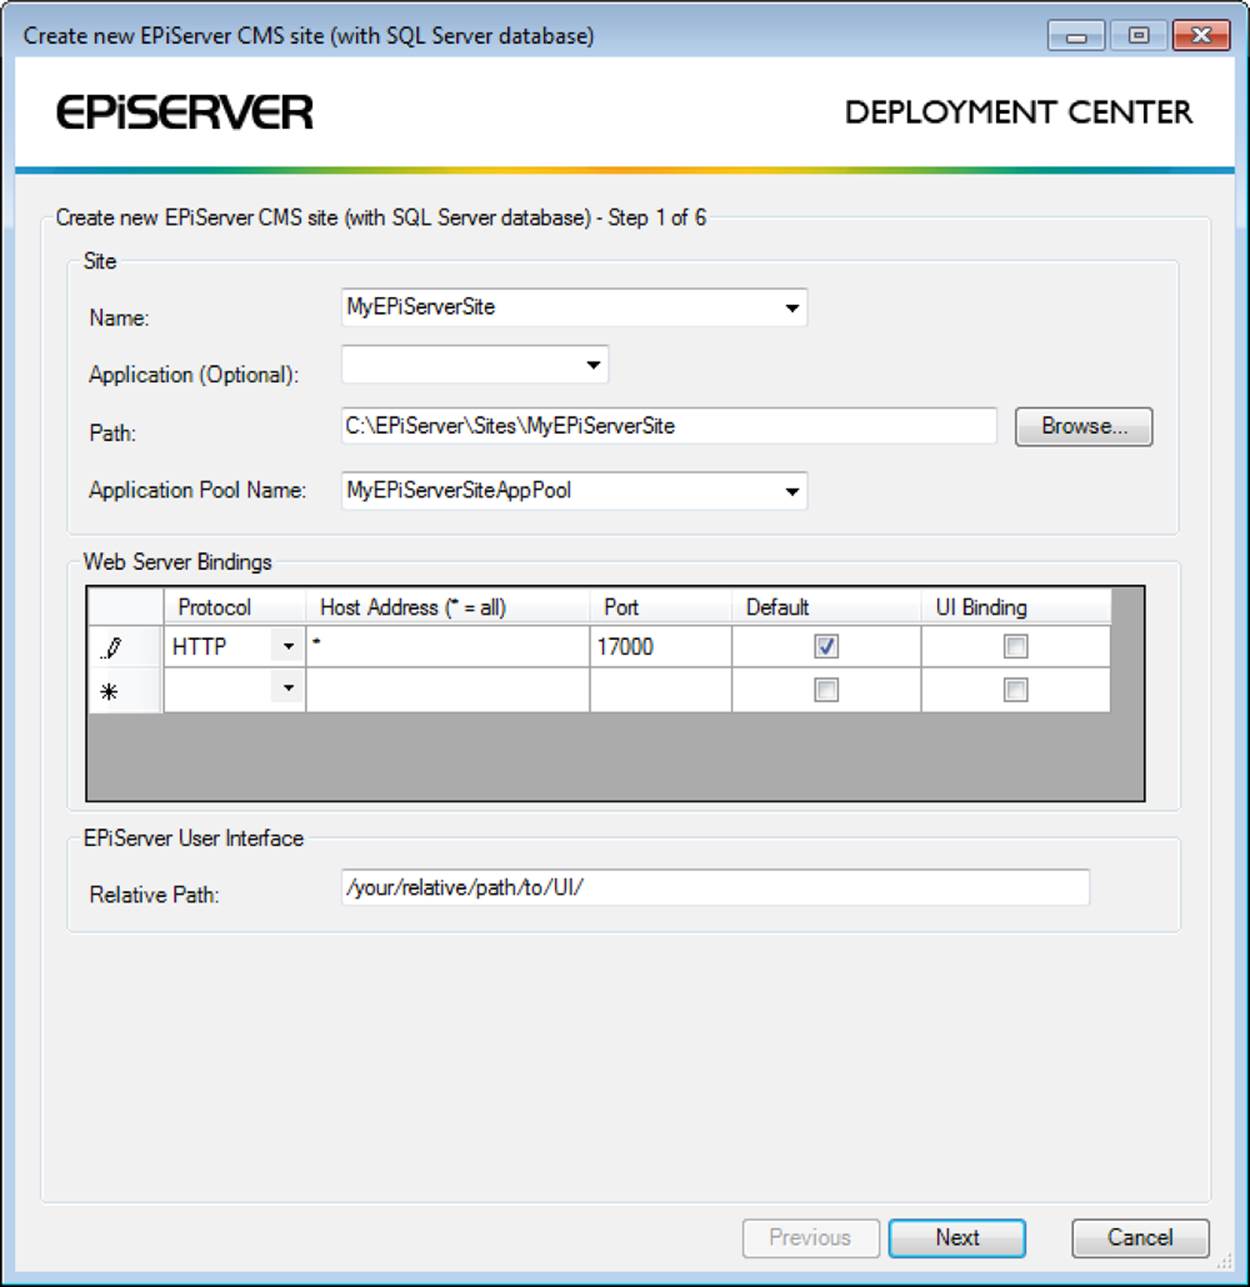 First step of the wizard for creating an EPiServer site using Deployment Center